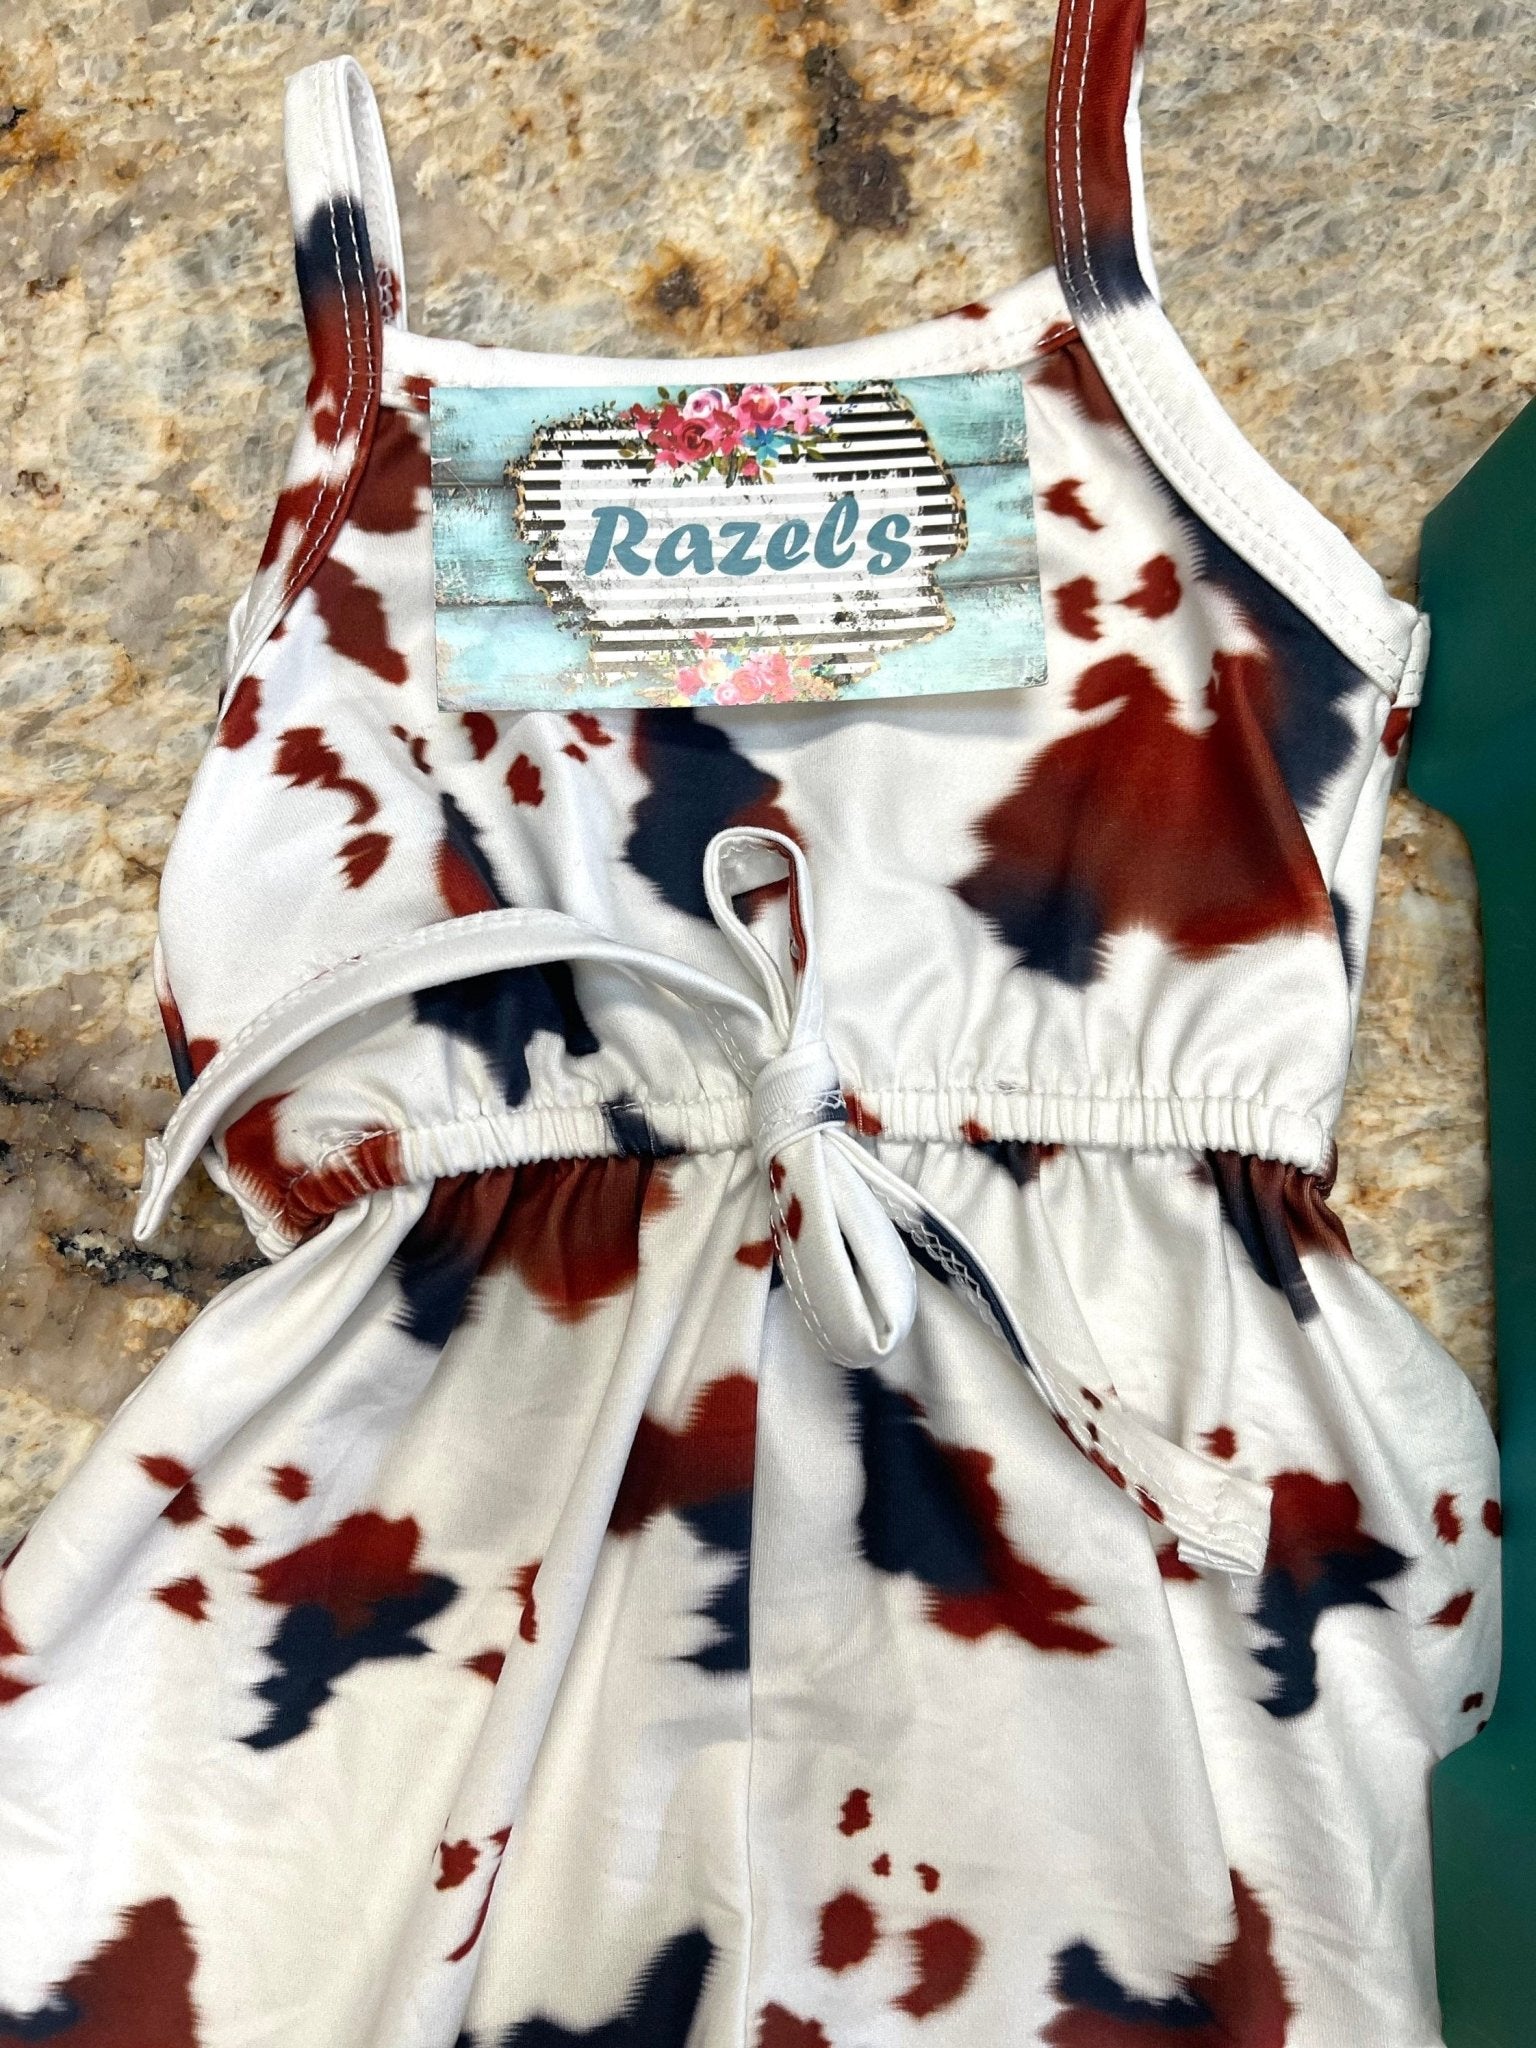 COWPRINT JUMPSUIT, COWBABE Cowgirl Romper, Western Rodeo Outfits - Razels